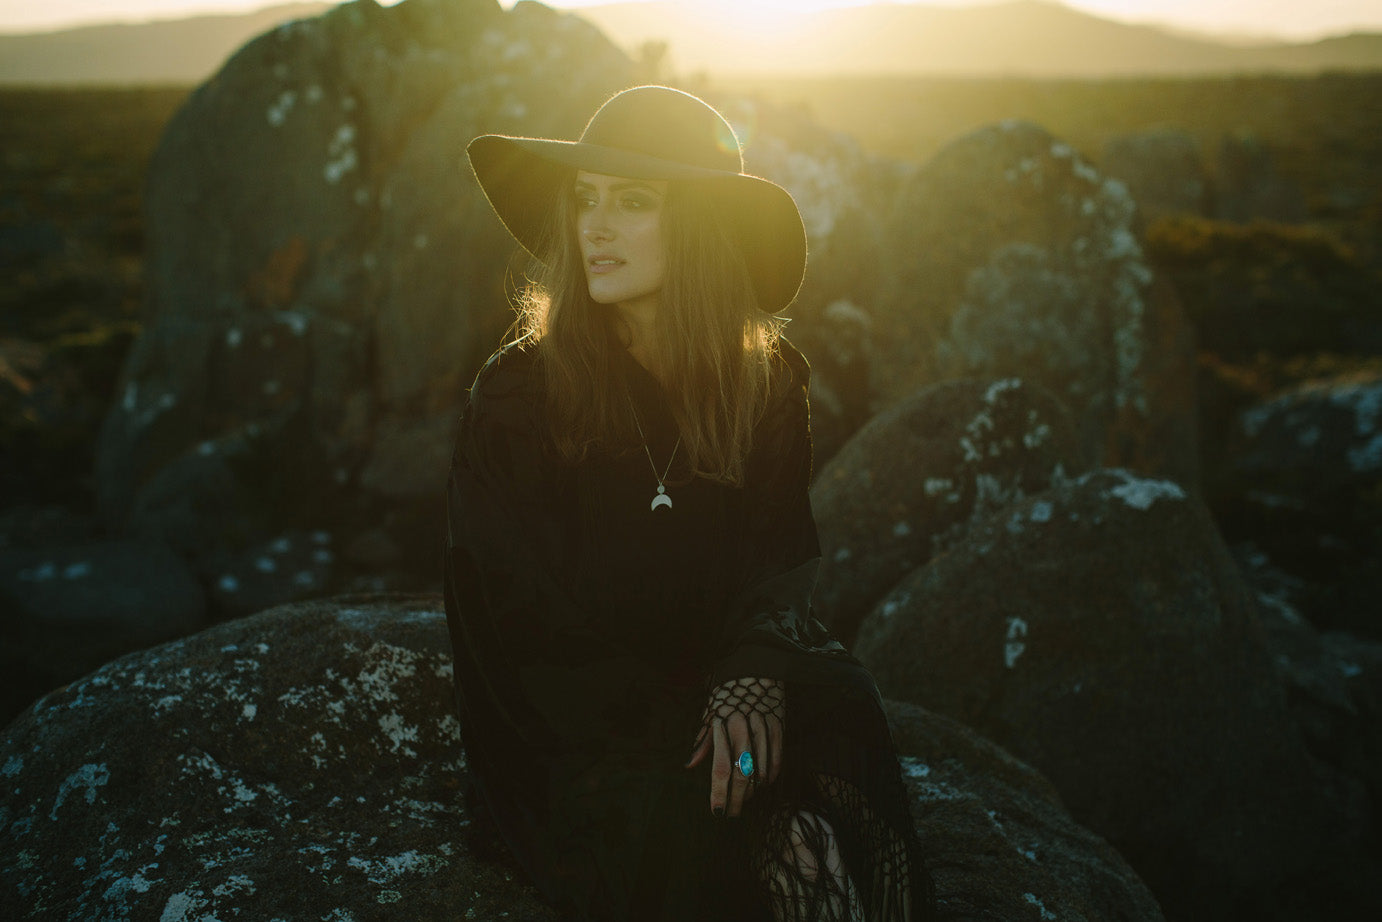 Emily Eliza Arlotte Handcrafted Fine Jewellery - Sterling Silver Crescent Moon Goddess Necklace Long Girl Wide Brim Hat Kimono Black Lace Sunset Mountain Witchy Dark Hair Boho Bohemian Style Fashion